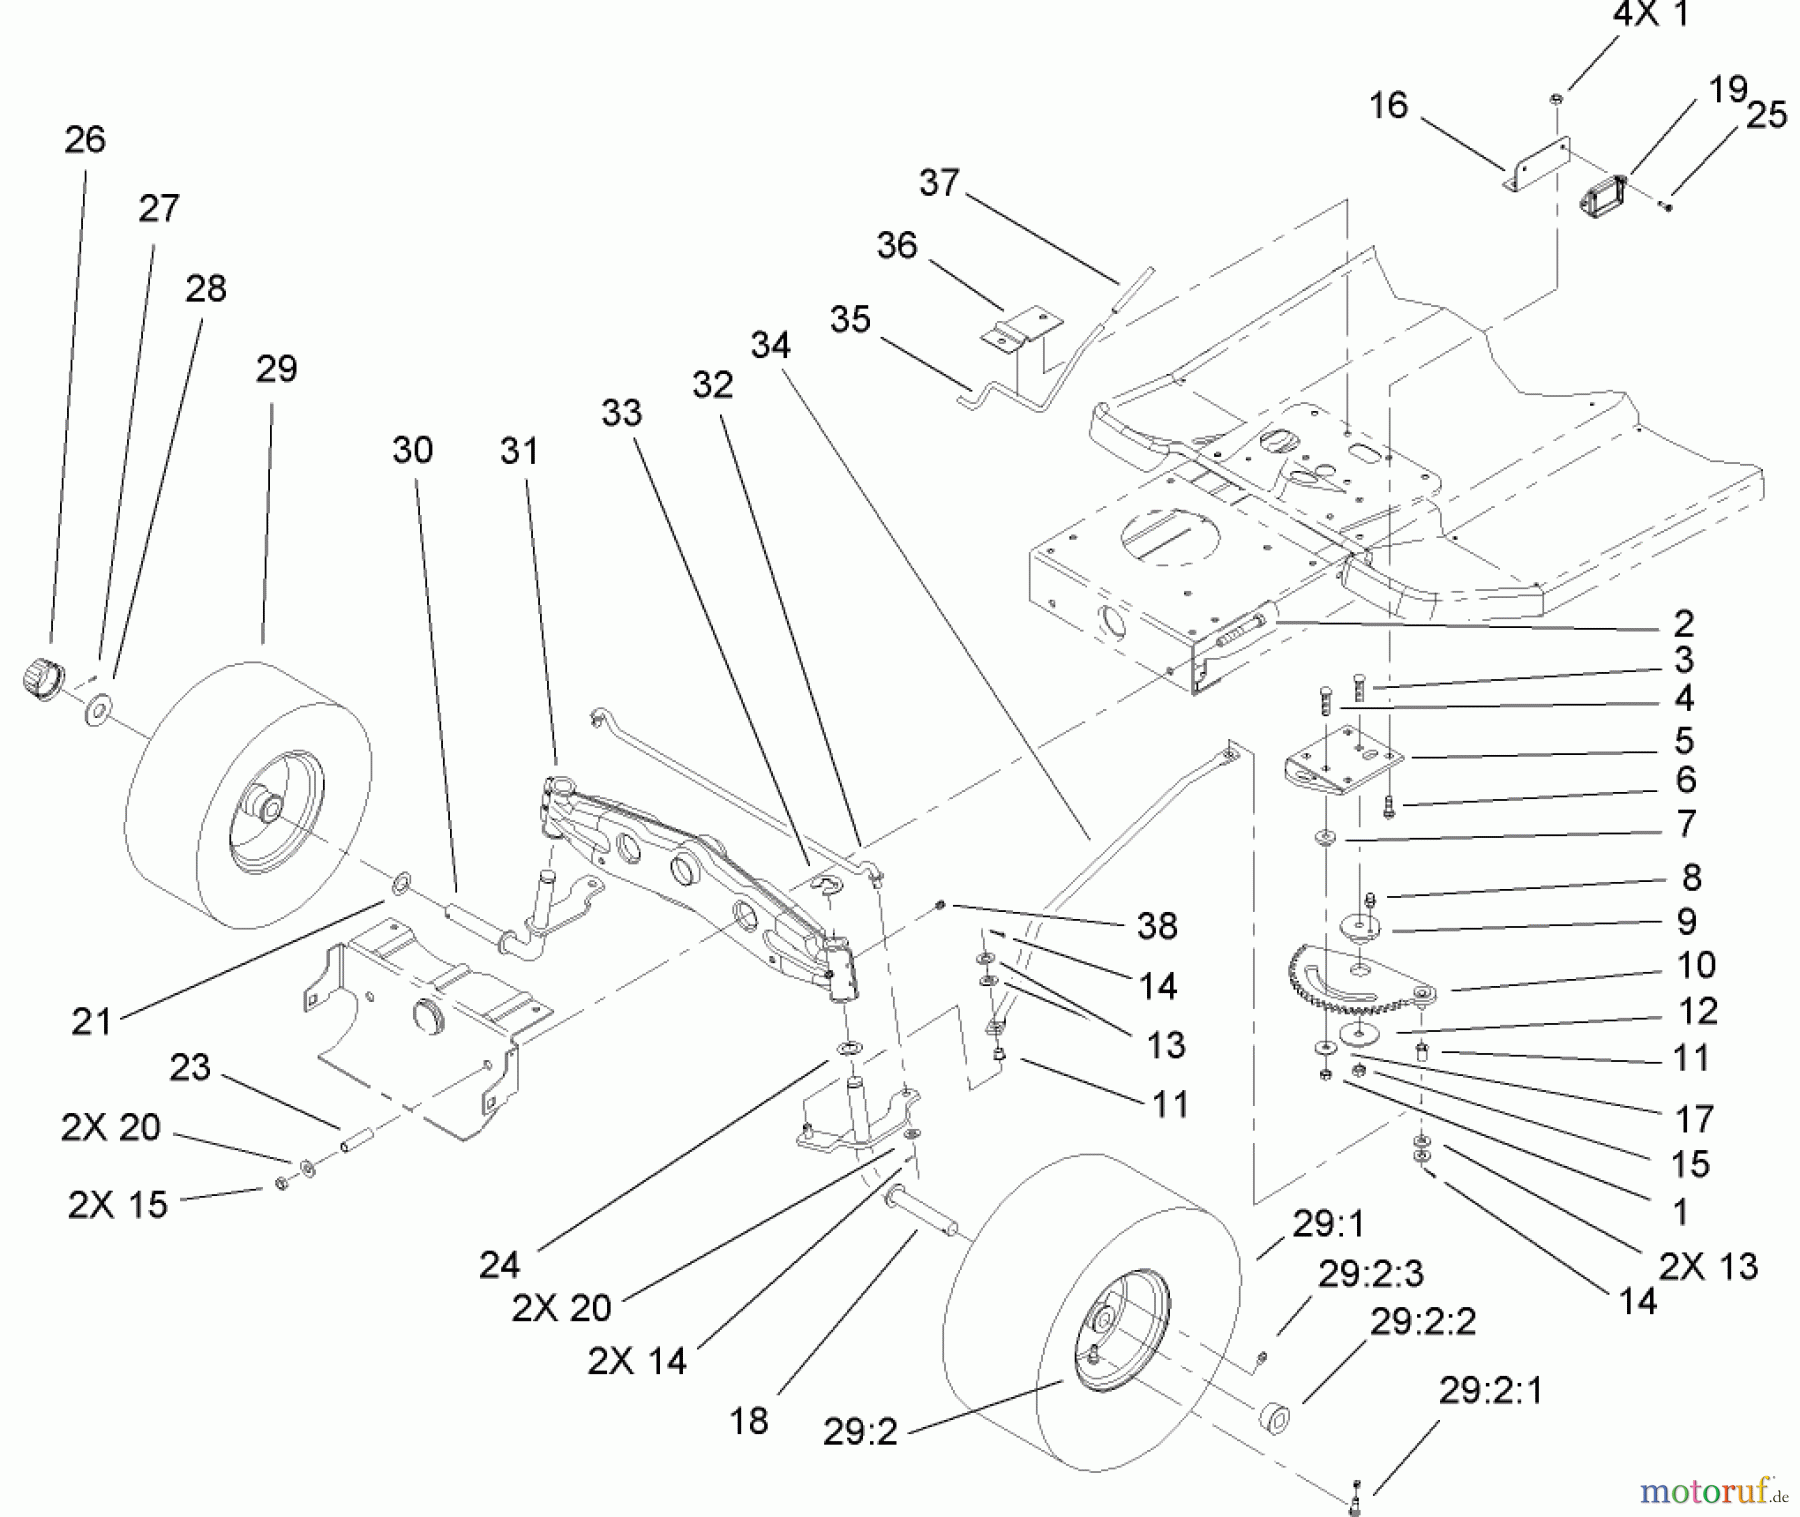  Toro Neu Mowers, Lawn & Garden Tractor Seite 1 71223 (16-38XL) - Toro 16-38XL Lawn Tractor, 2004 (240000001-240999999) STEERING COMPONENT ASSEMBLY